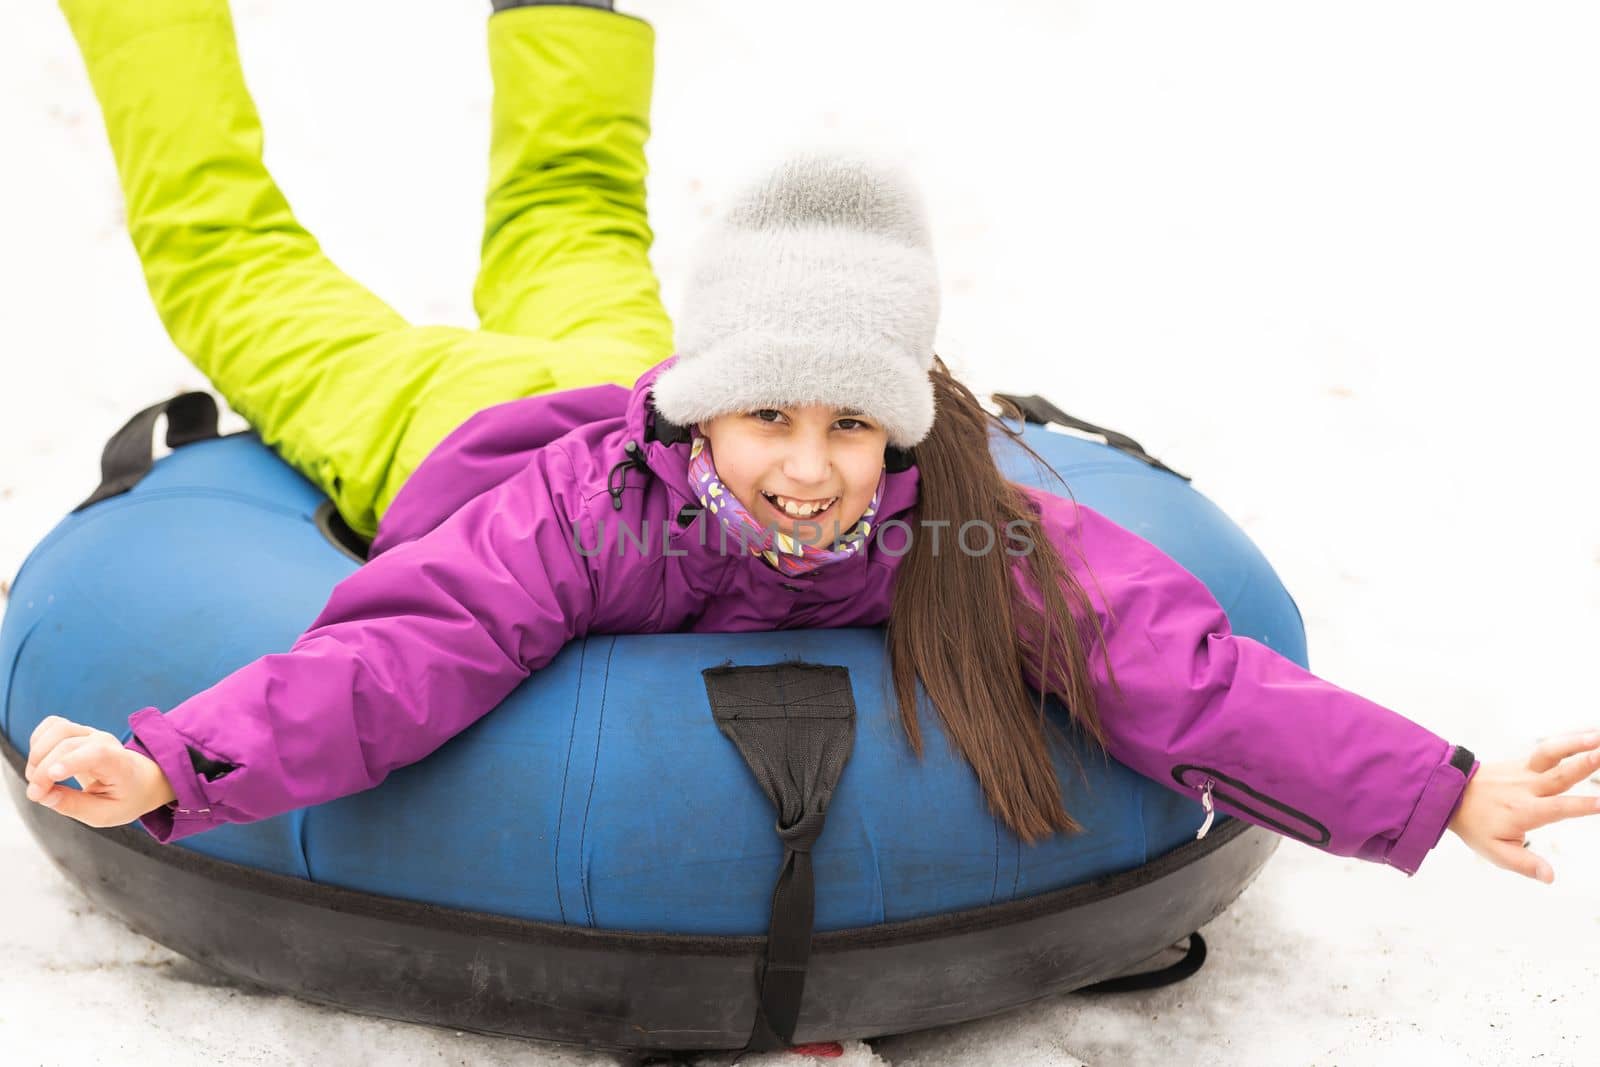 Children ride on tubing. Winter entertainment. Tubing. People roll on the slides